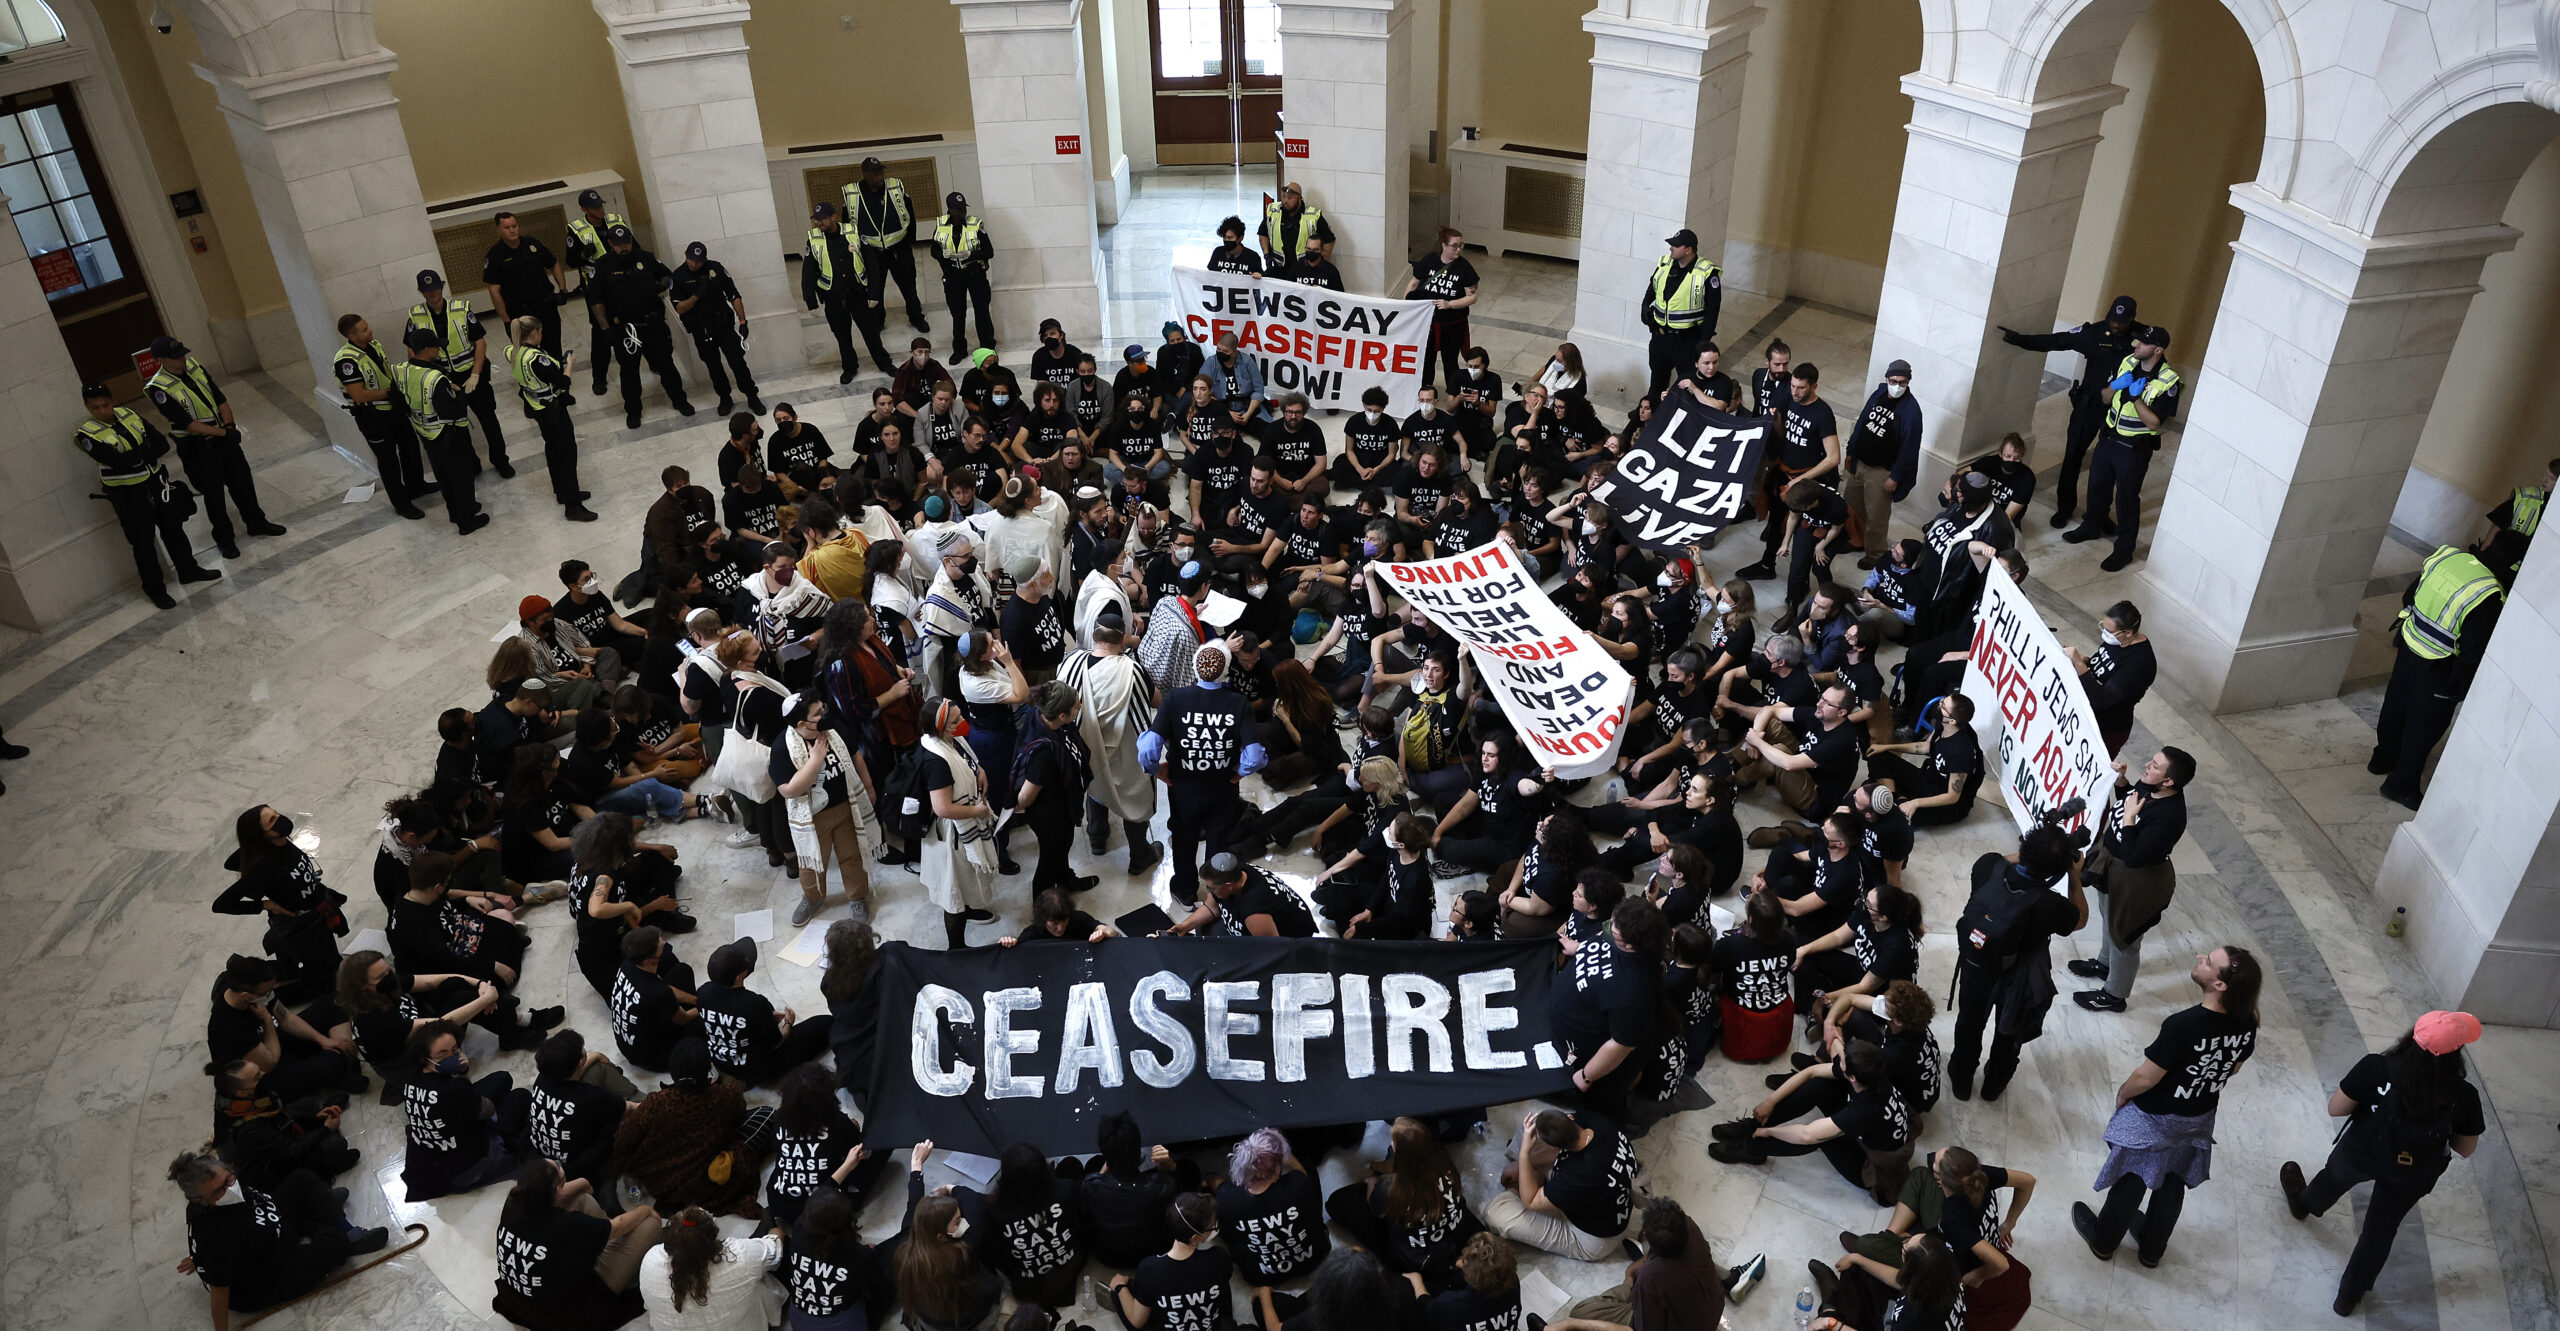 Police Arrest Over 300 Pro-Palestinian Protesters Inside Congressional Office Building